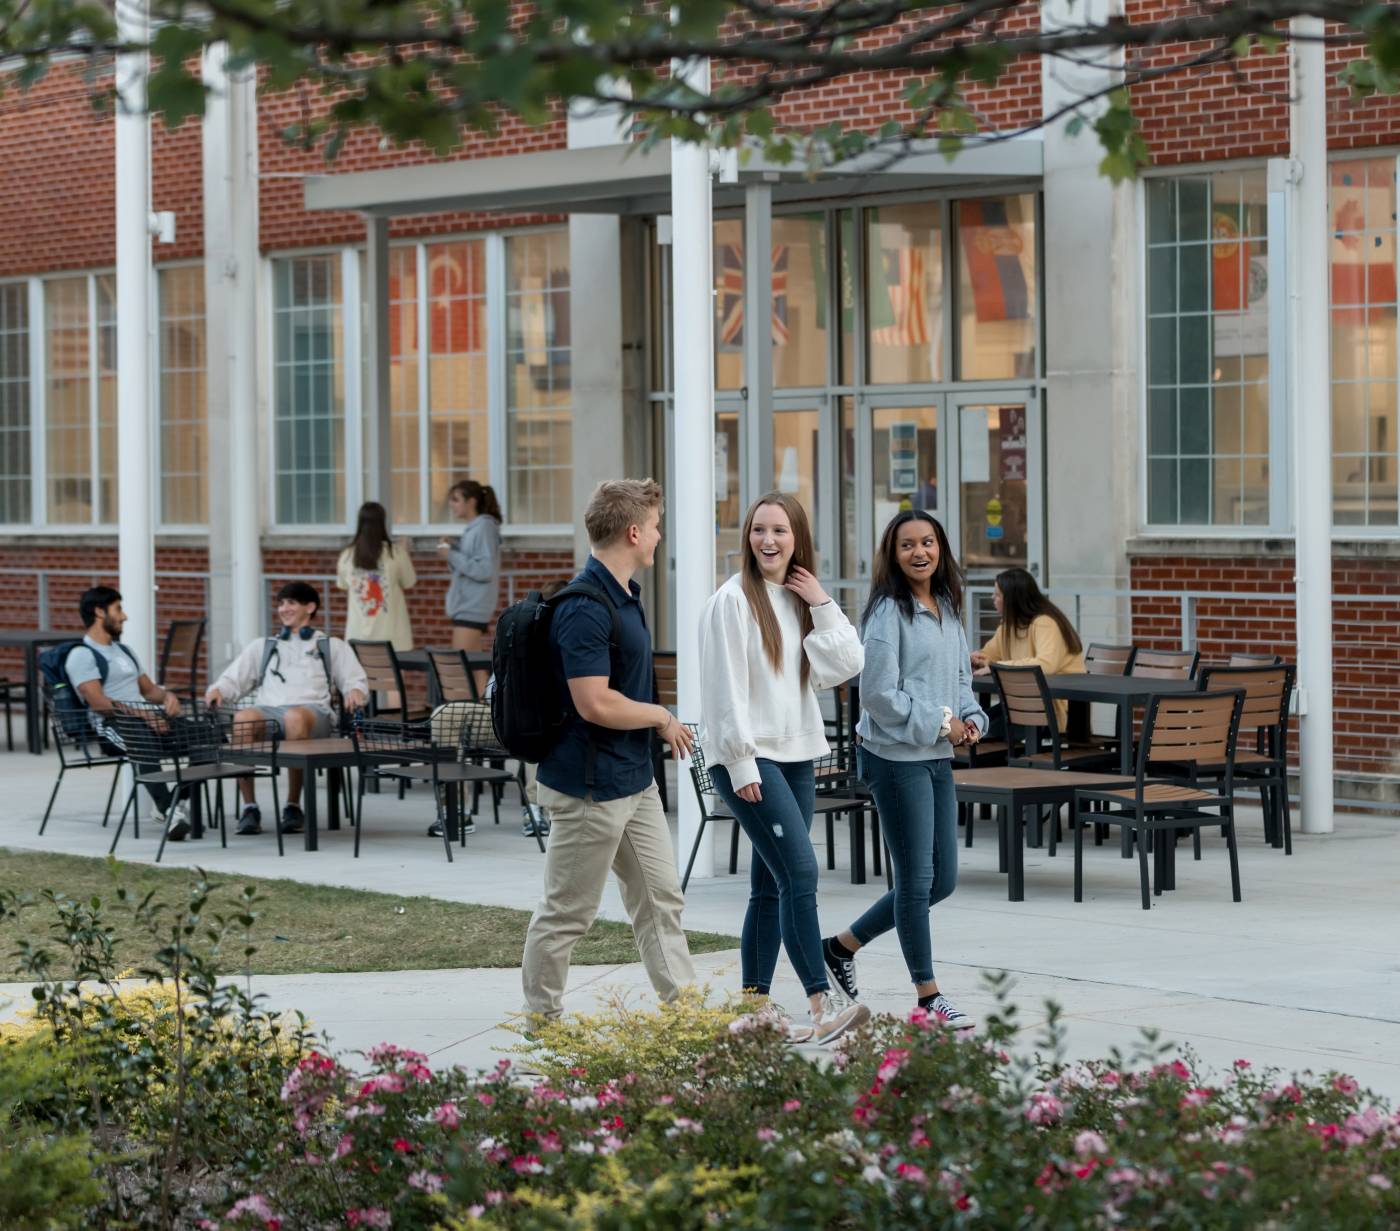 Prospective students can experience what life at Mississippi College is all about during Spring Preview Day.